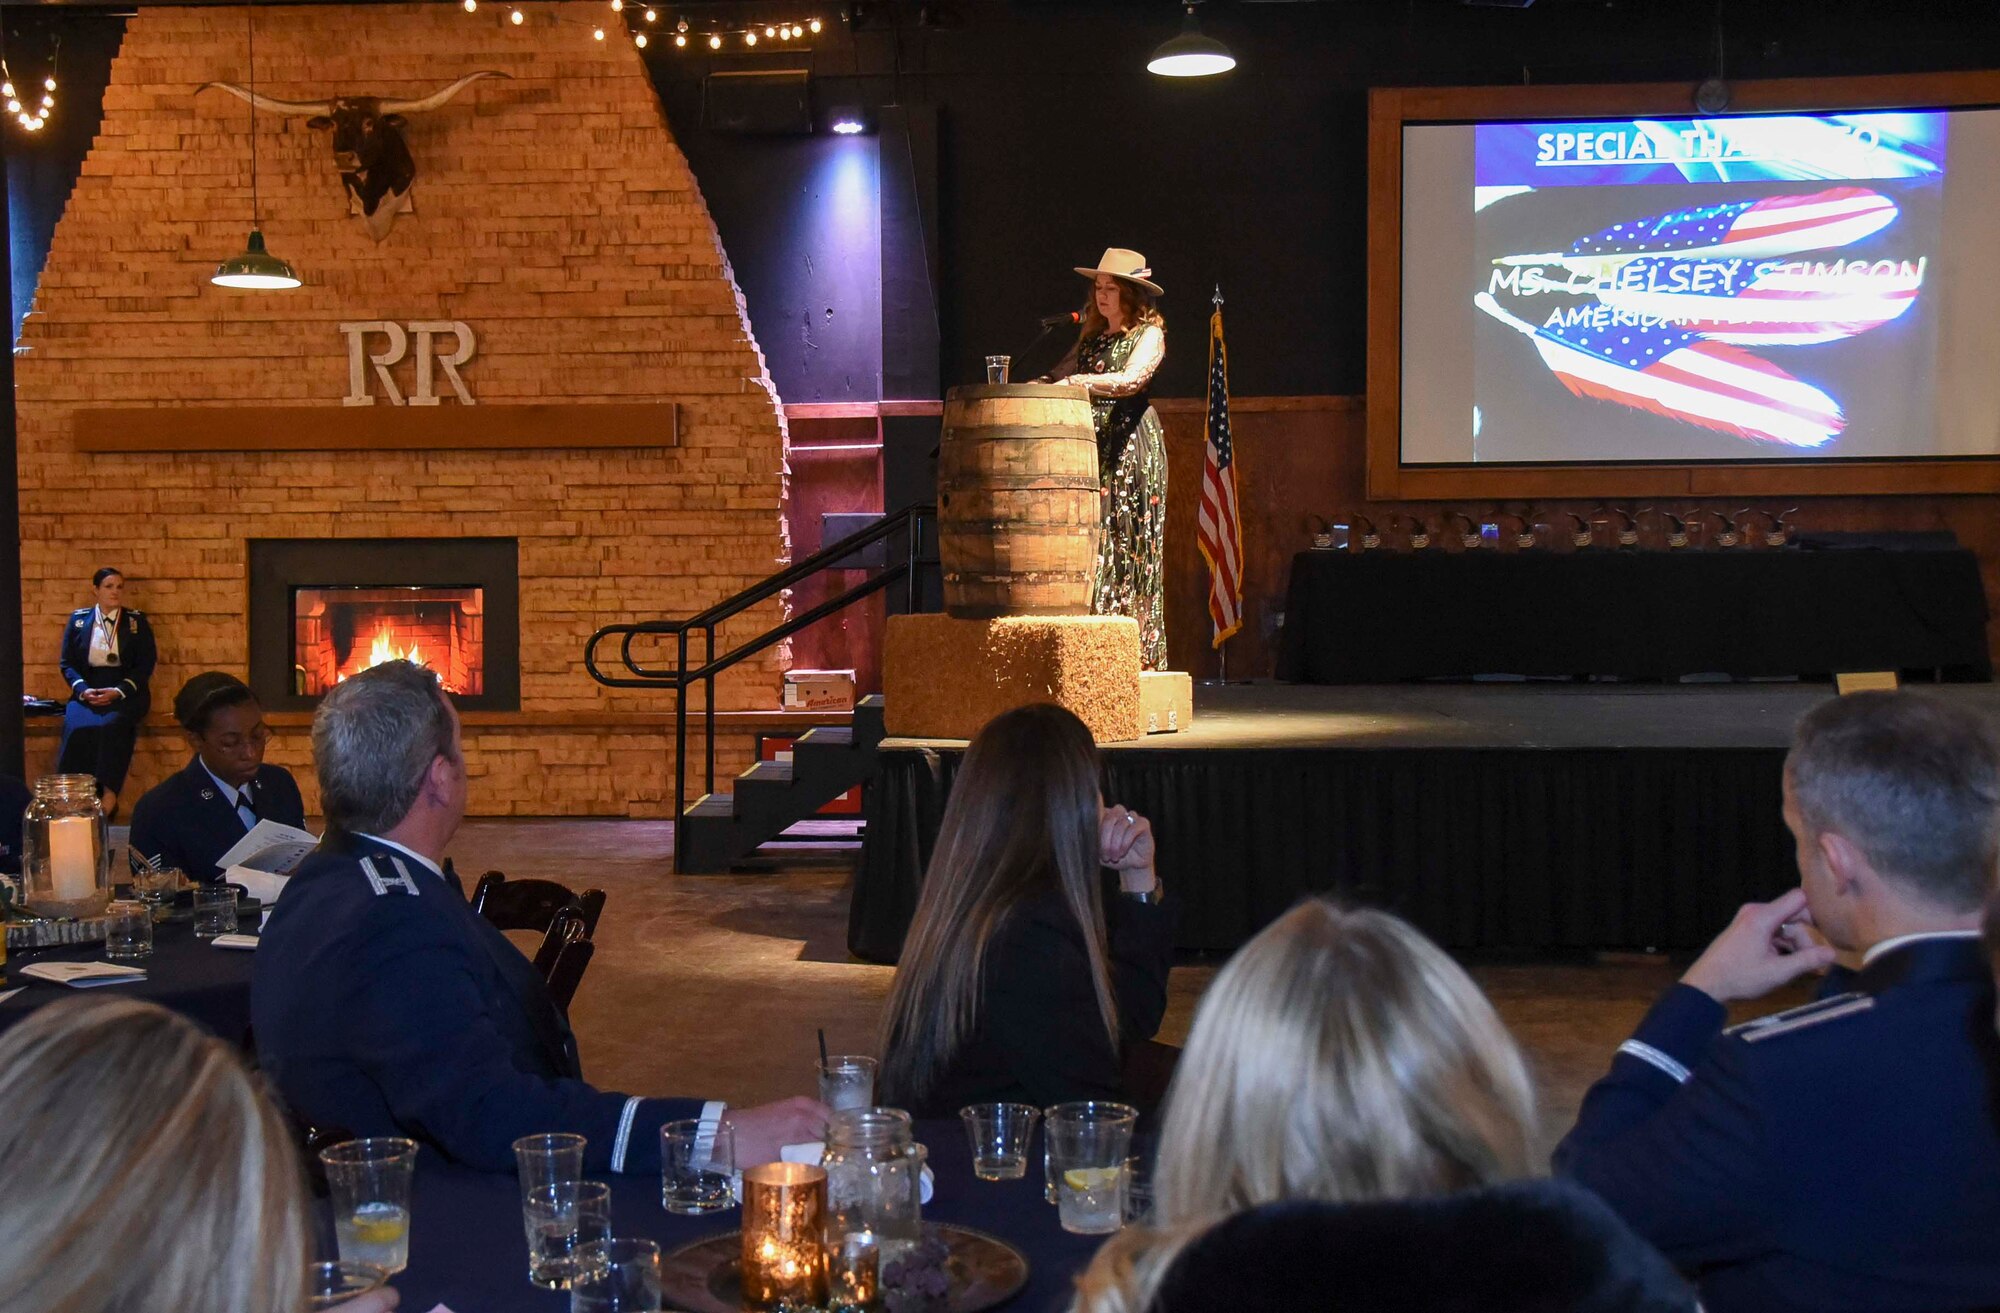 Chelsey Stimson, artist and owner of American Feathers, shares her story at the 301st Annual Awards Banquet Feb. 9, 2019 at River Ranch Stockyards, Fort Worth, Texas. After the passing of her husband, a Navy SEAL and former Marine, from an accident at home, Stimson started painting the American Feather to represent the service and sacrifice of those in the military.
(U.S. Air Force photo by MSgt. Jeremy Roman)